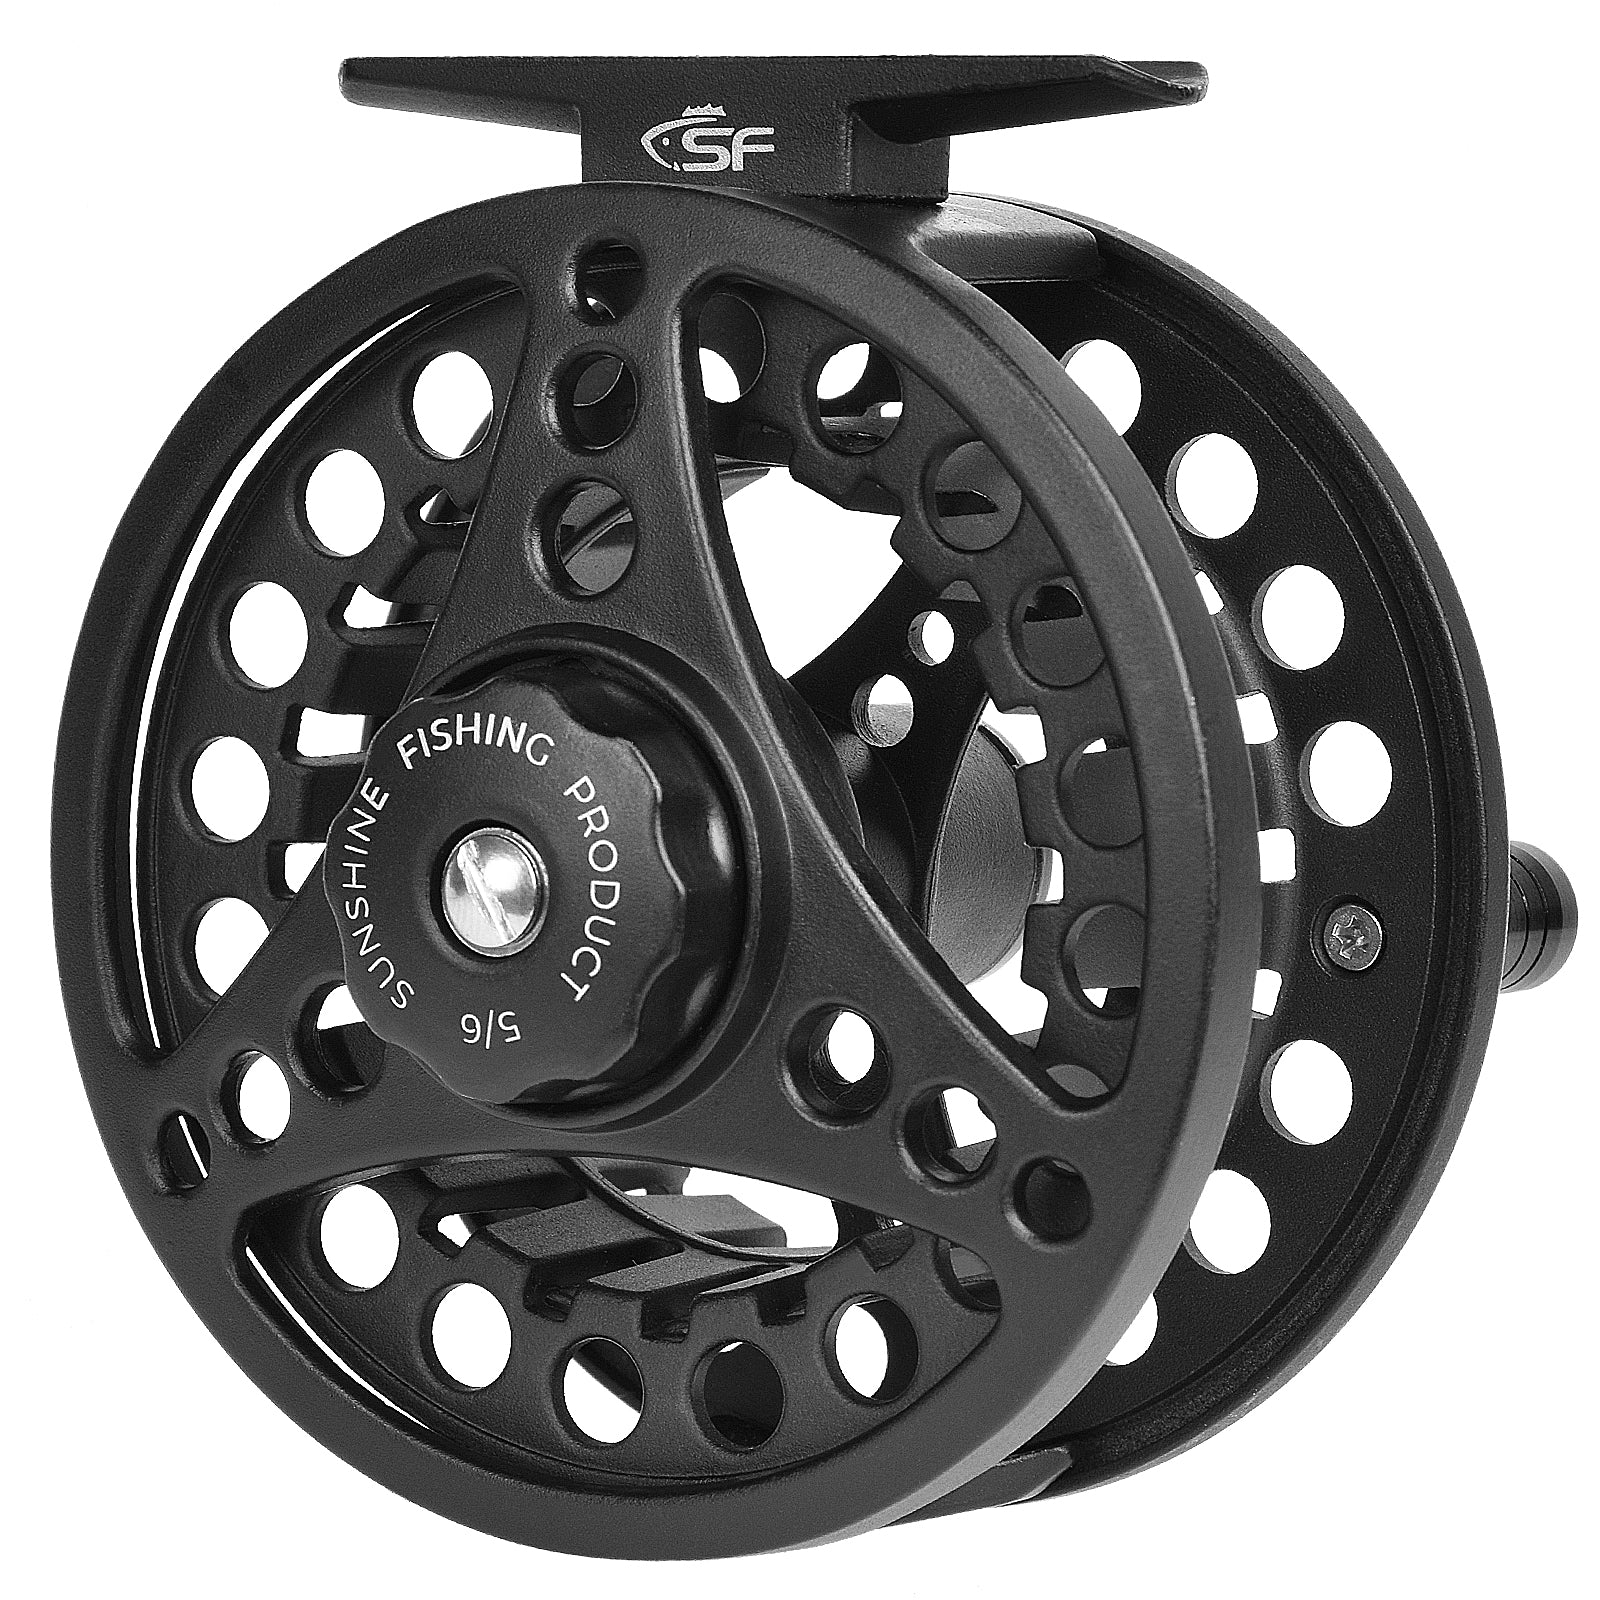 SF Large Arbor Fly Fishing Reel with Aluminum Alloy Body 3/4wt 5/6wt 7